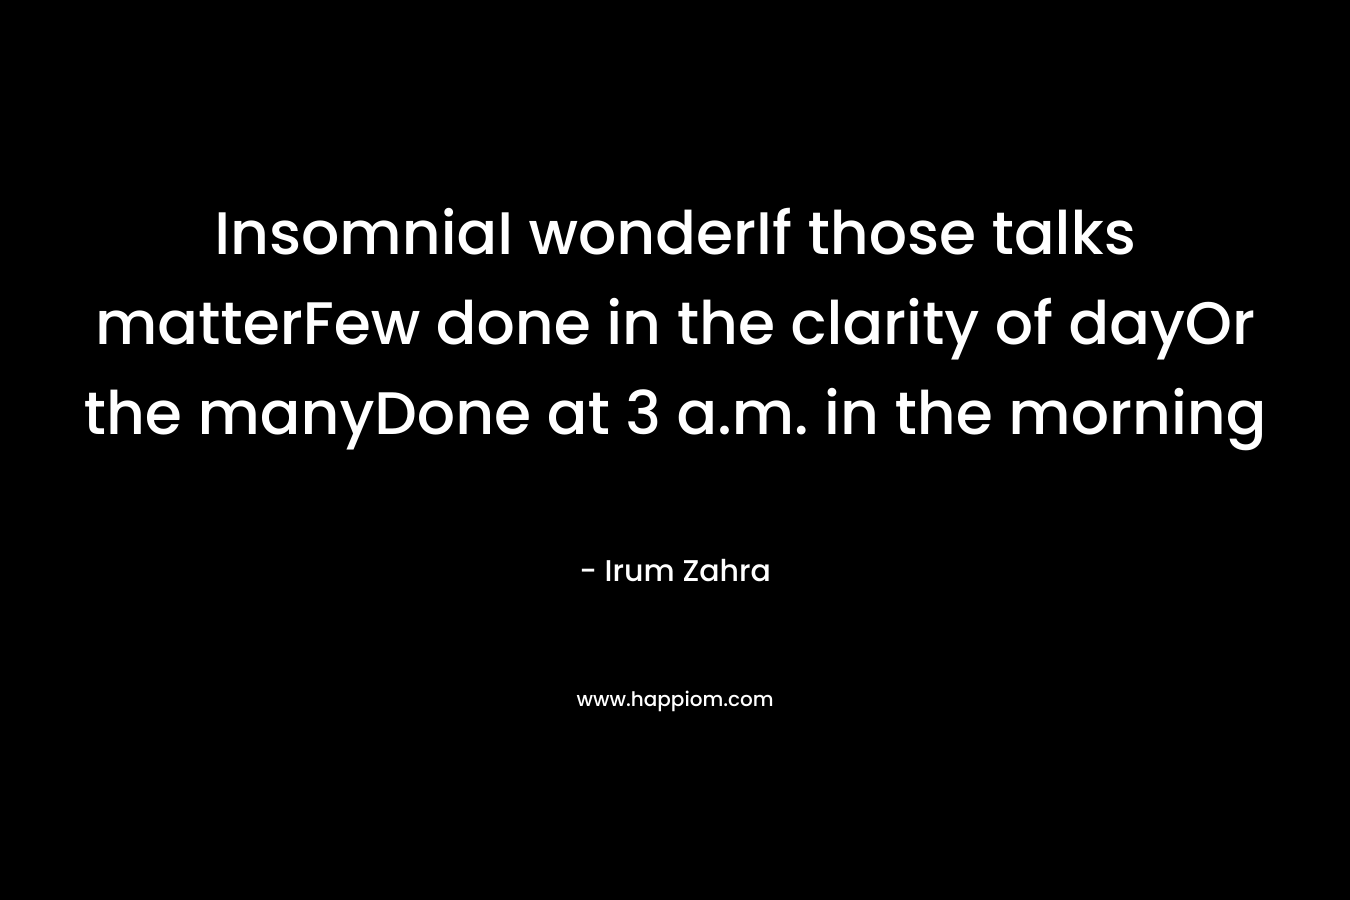 InsomniaI wonderIf those talks matterFew done in the clarity of dayOr the manyDone at 3 a.m. in the morning – Irum Zahra